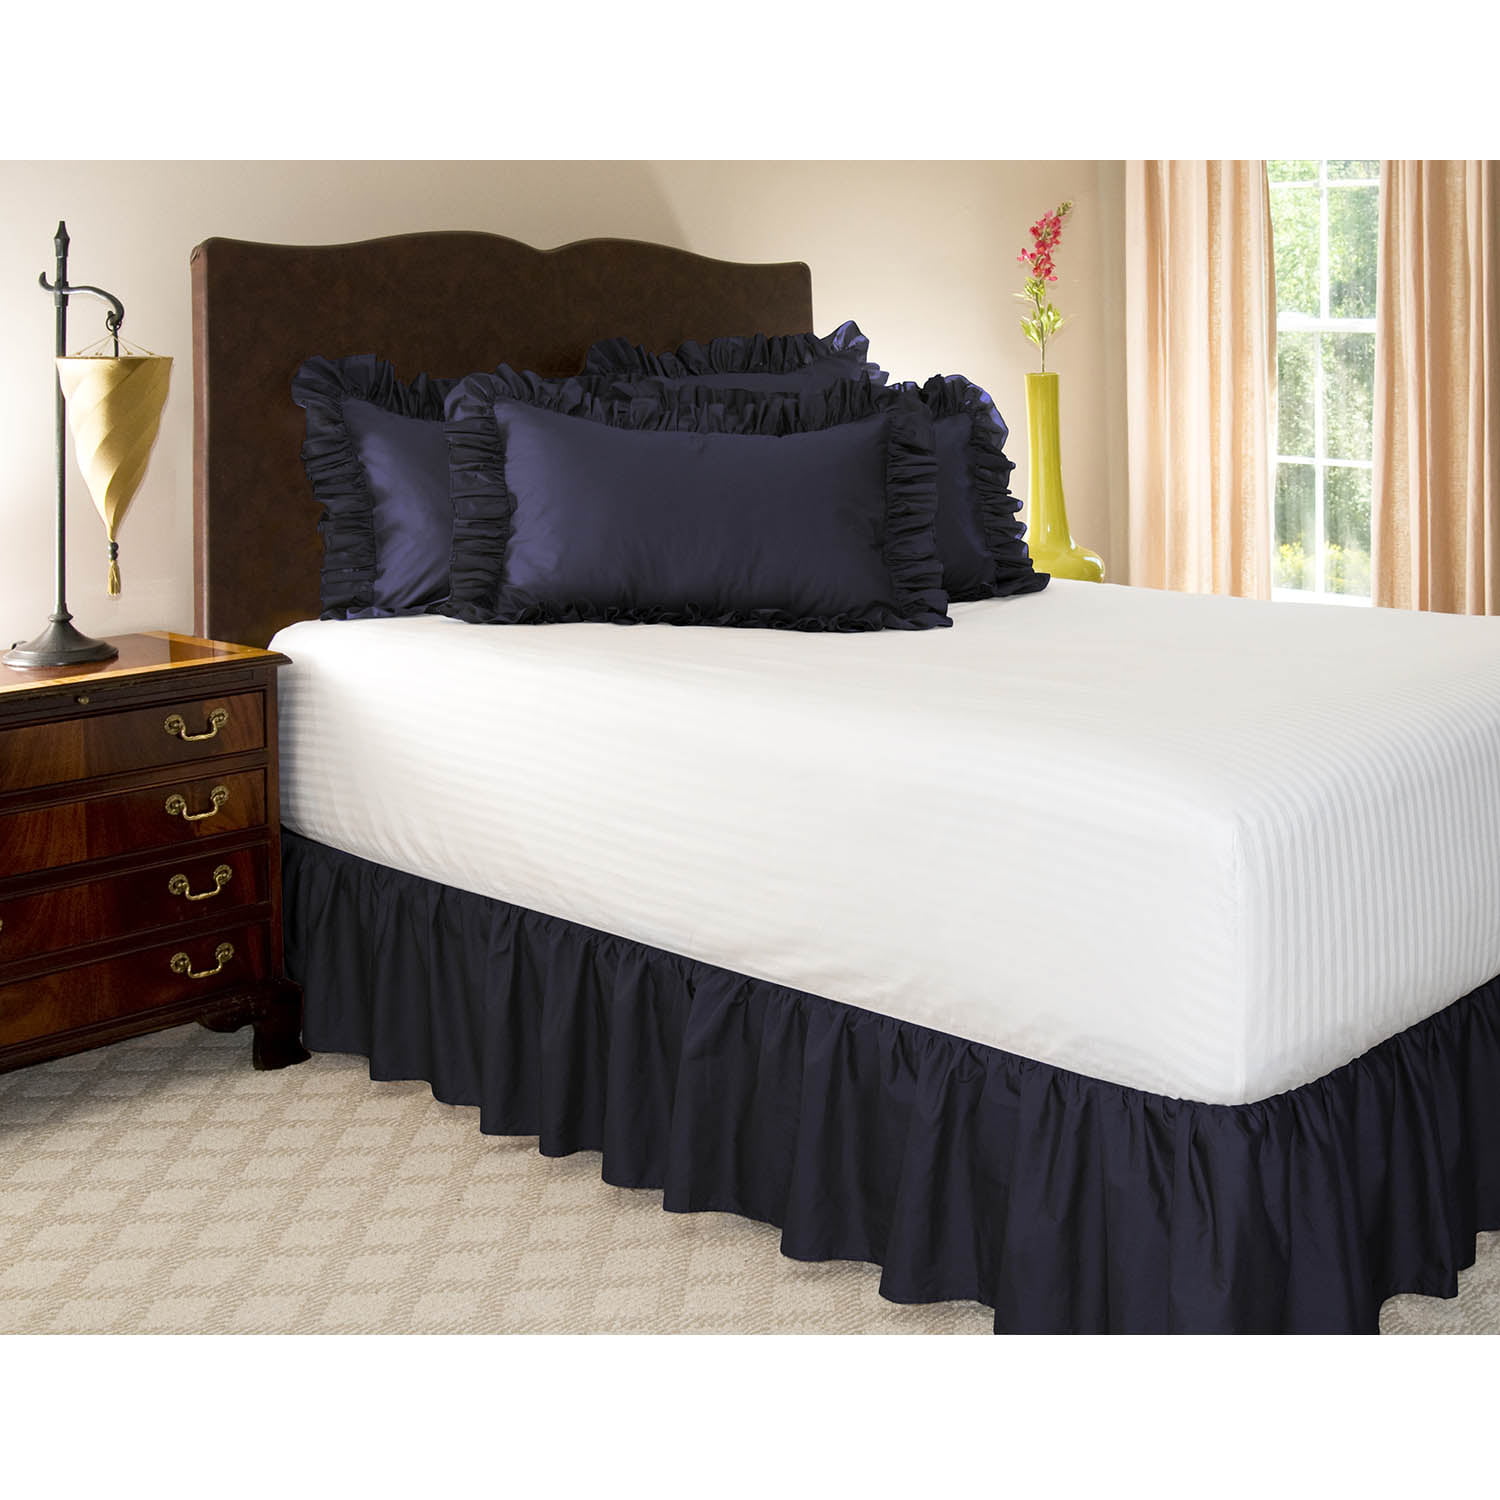 ruffled bed skirt (king, navy blue) 21 inch drop bedskirt with platform ...